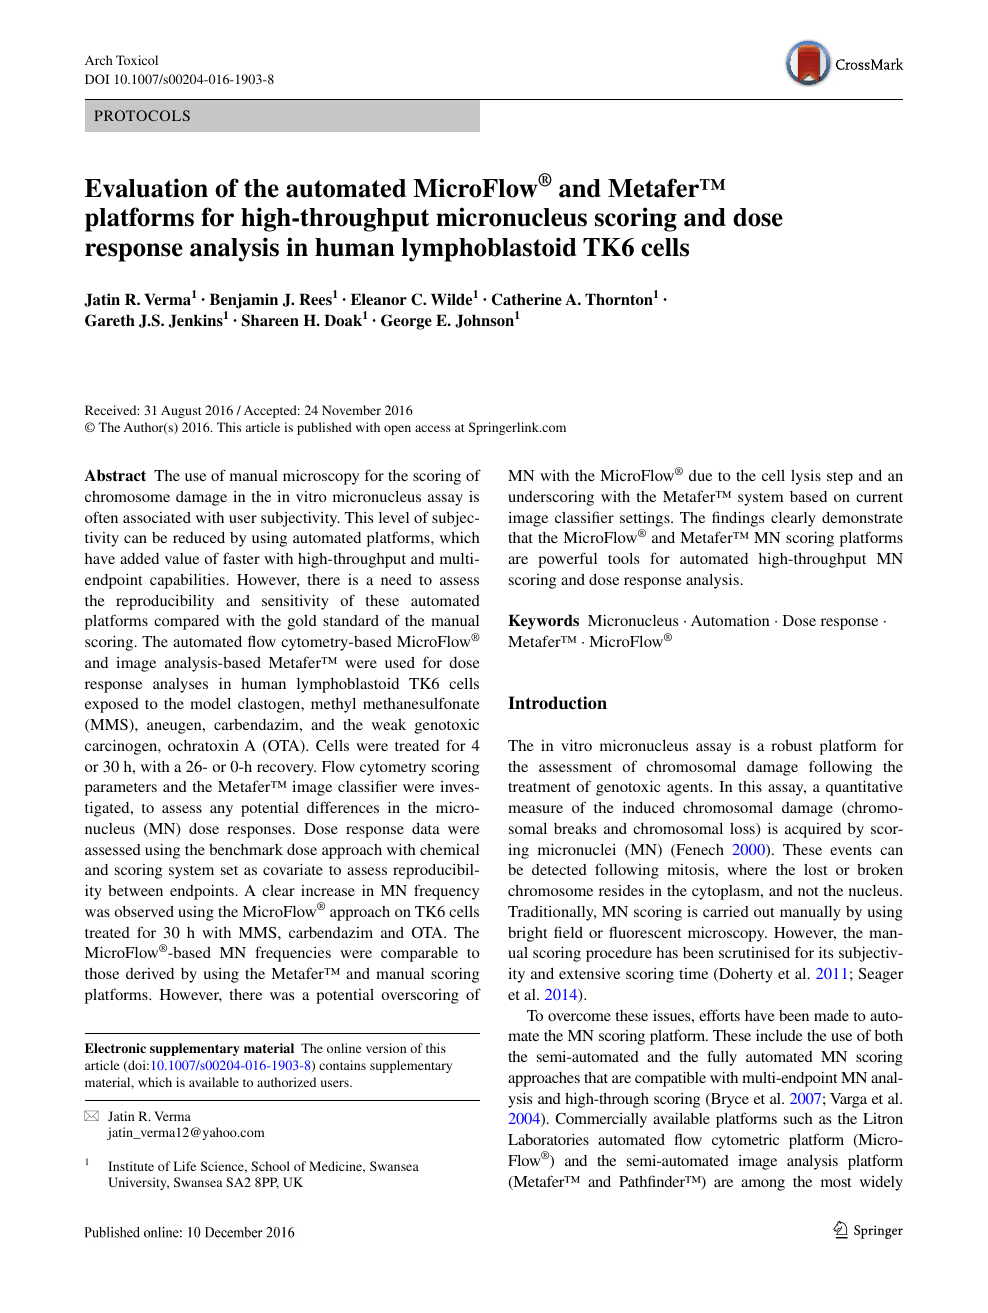 Evaluation Of The Automated Microflow And Metafer Platforms For High Throughput Micronucleus Scoring And Dose Response Analysis In Human Lymphoblastoid Tk6 Cells Topic Of Research Paper In Biological Sciences Download Scholarly Article